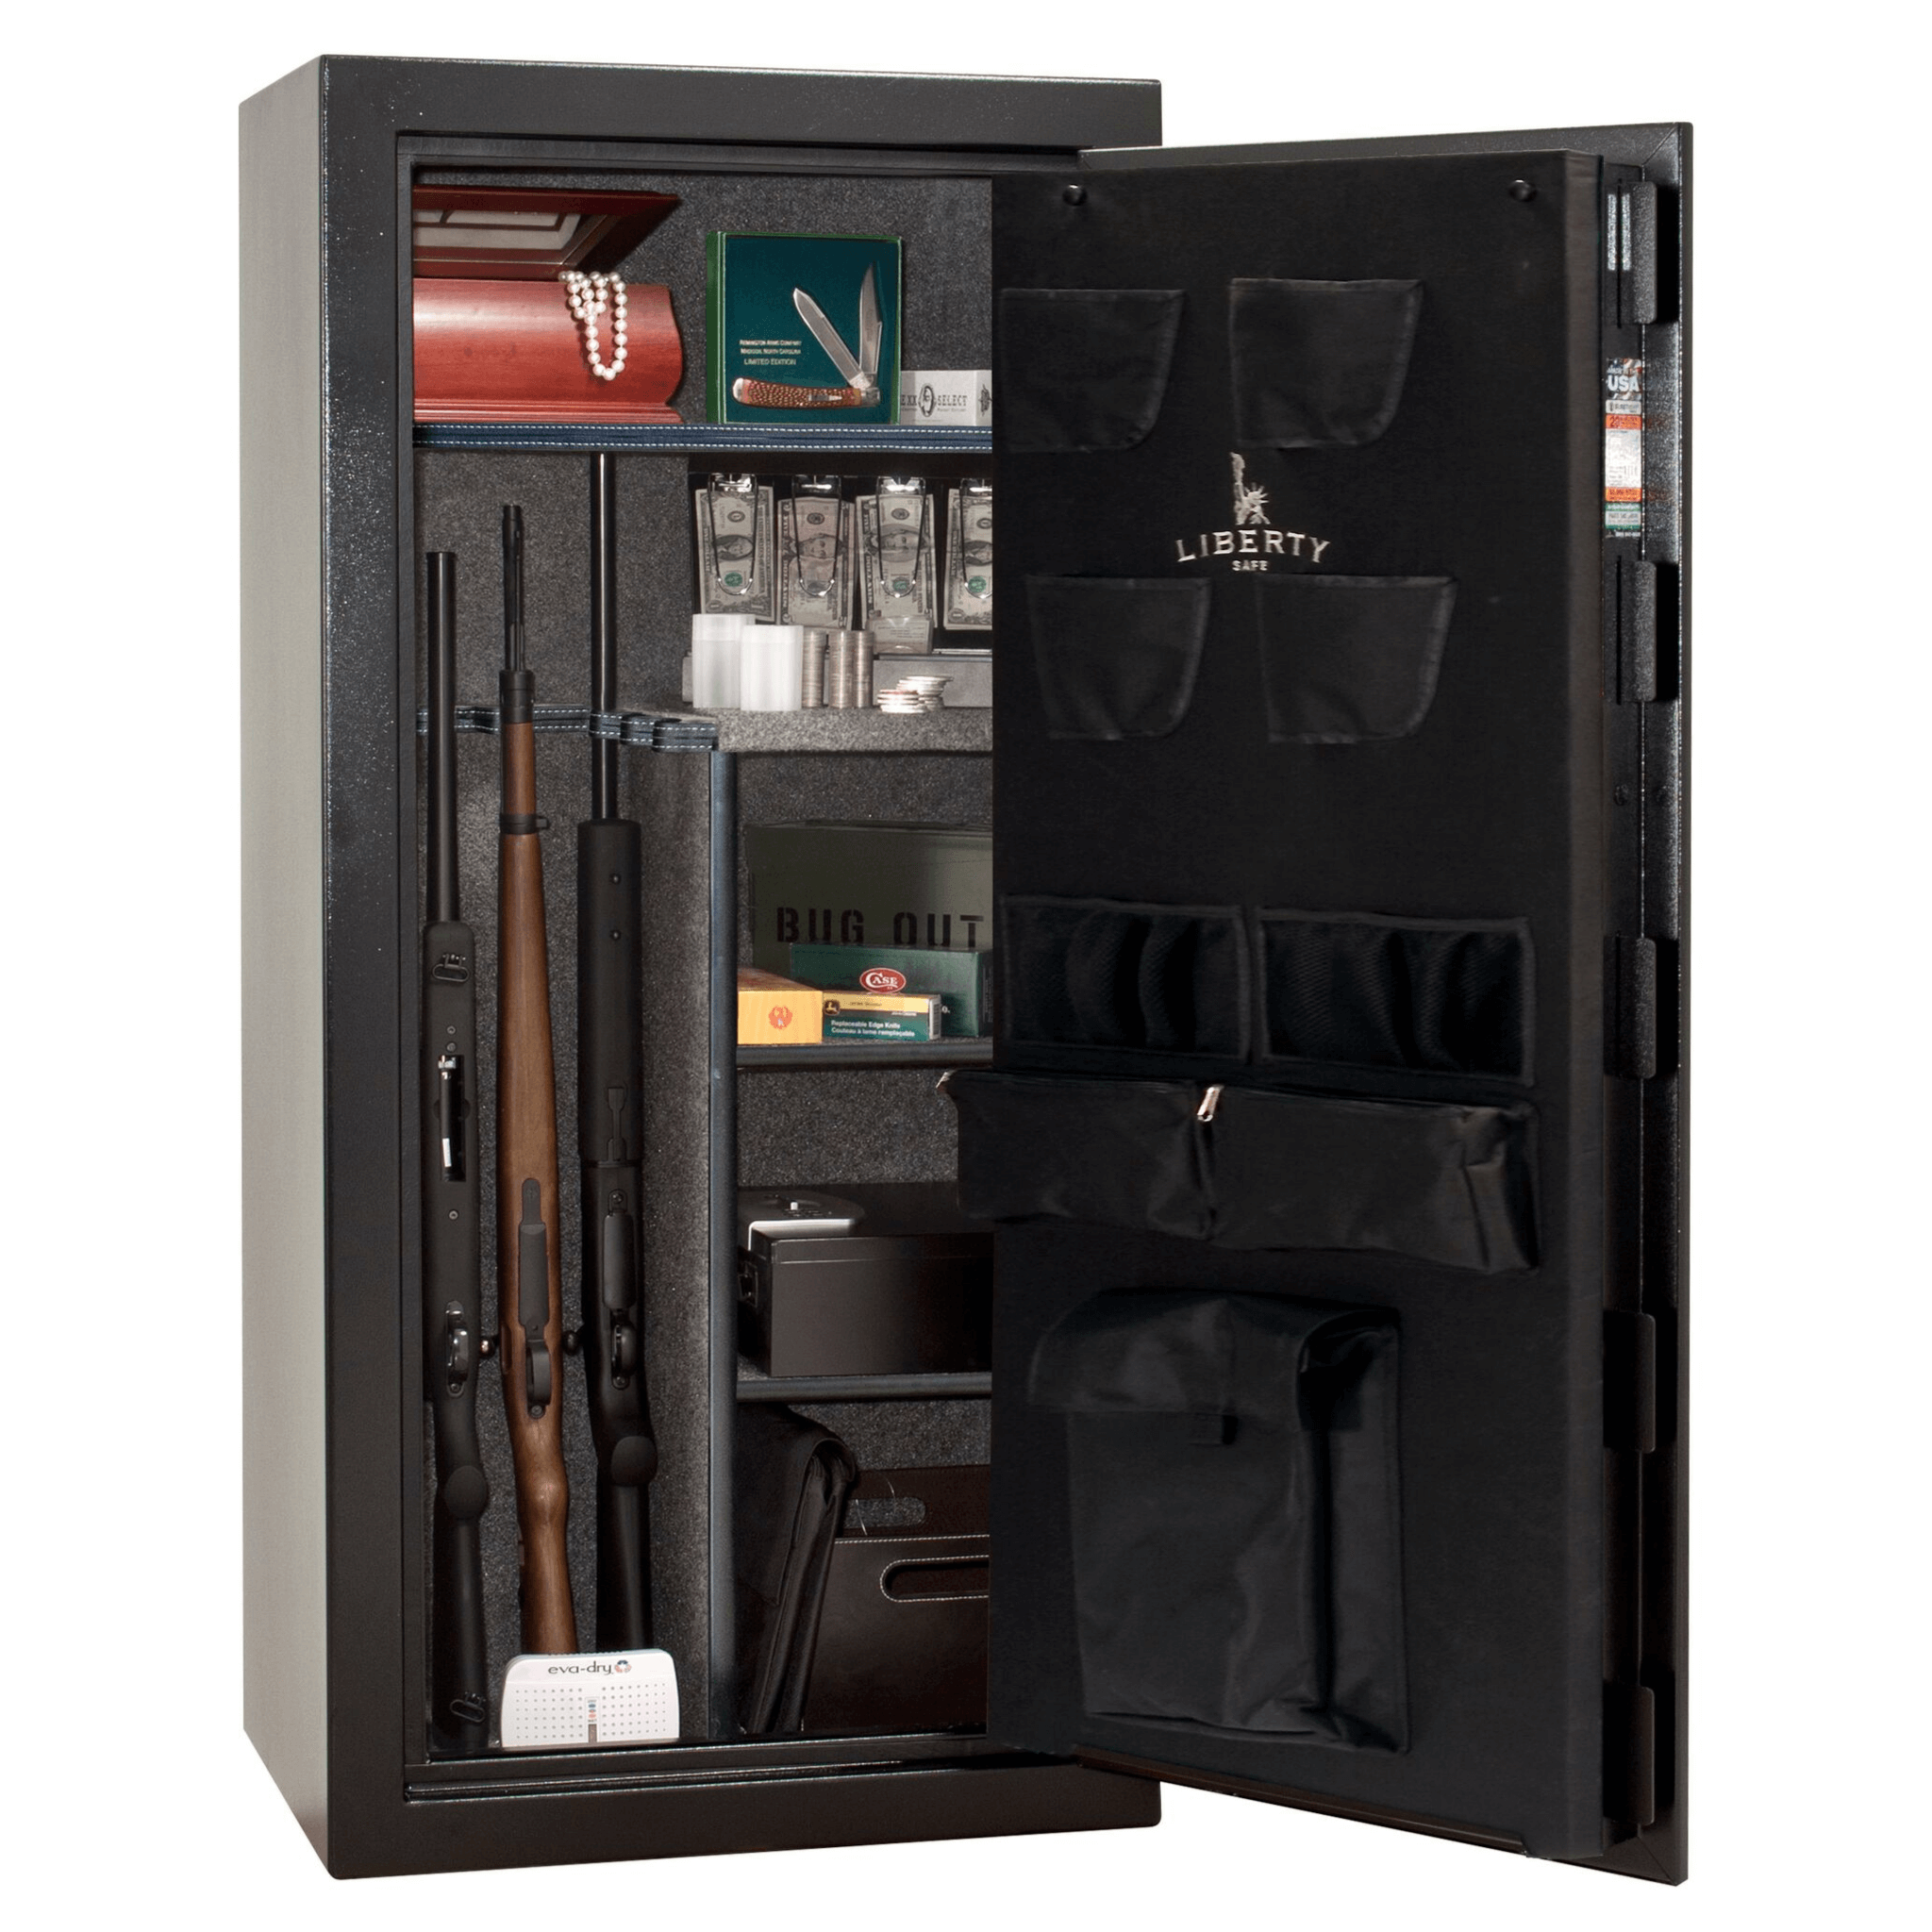 Liberty Centurion DLX 24 Texture Granite with Electronic Lock Gun Safe - OUT THE DOOR, photo 2